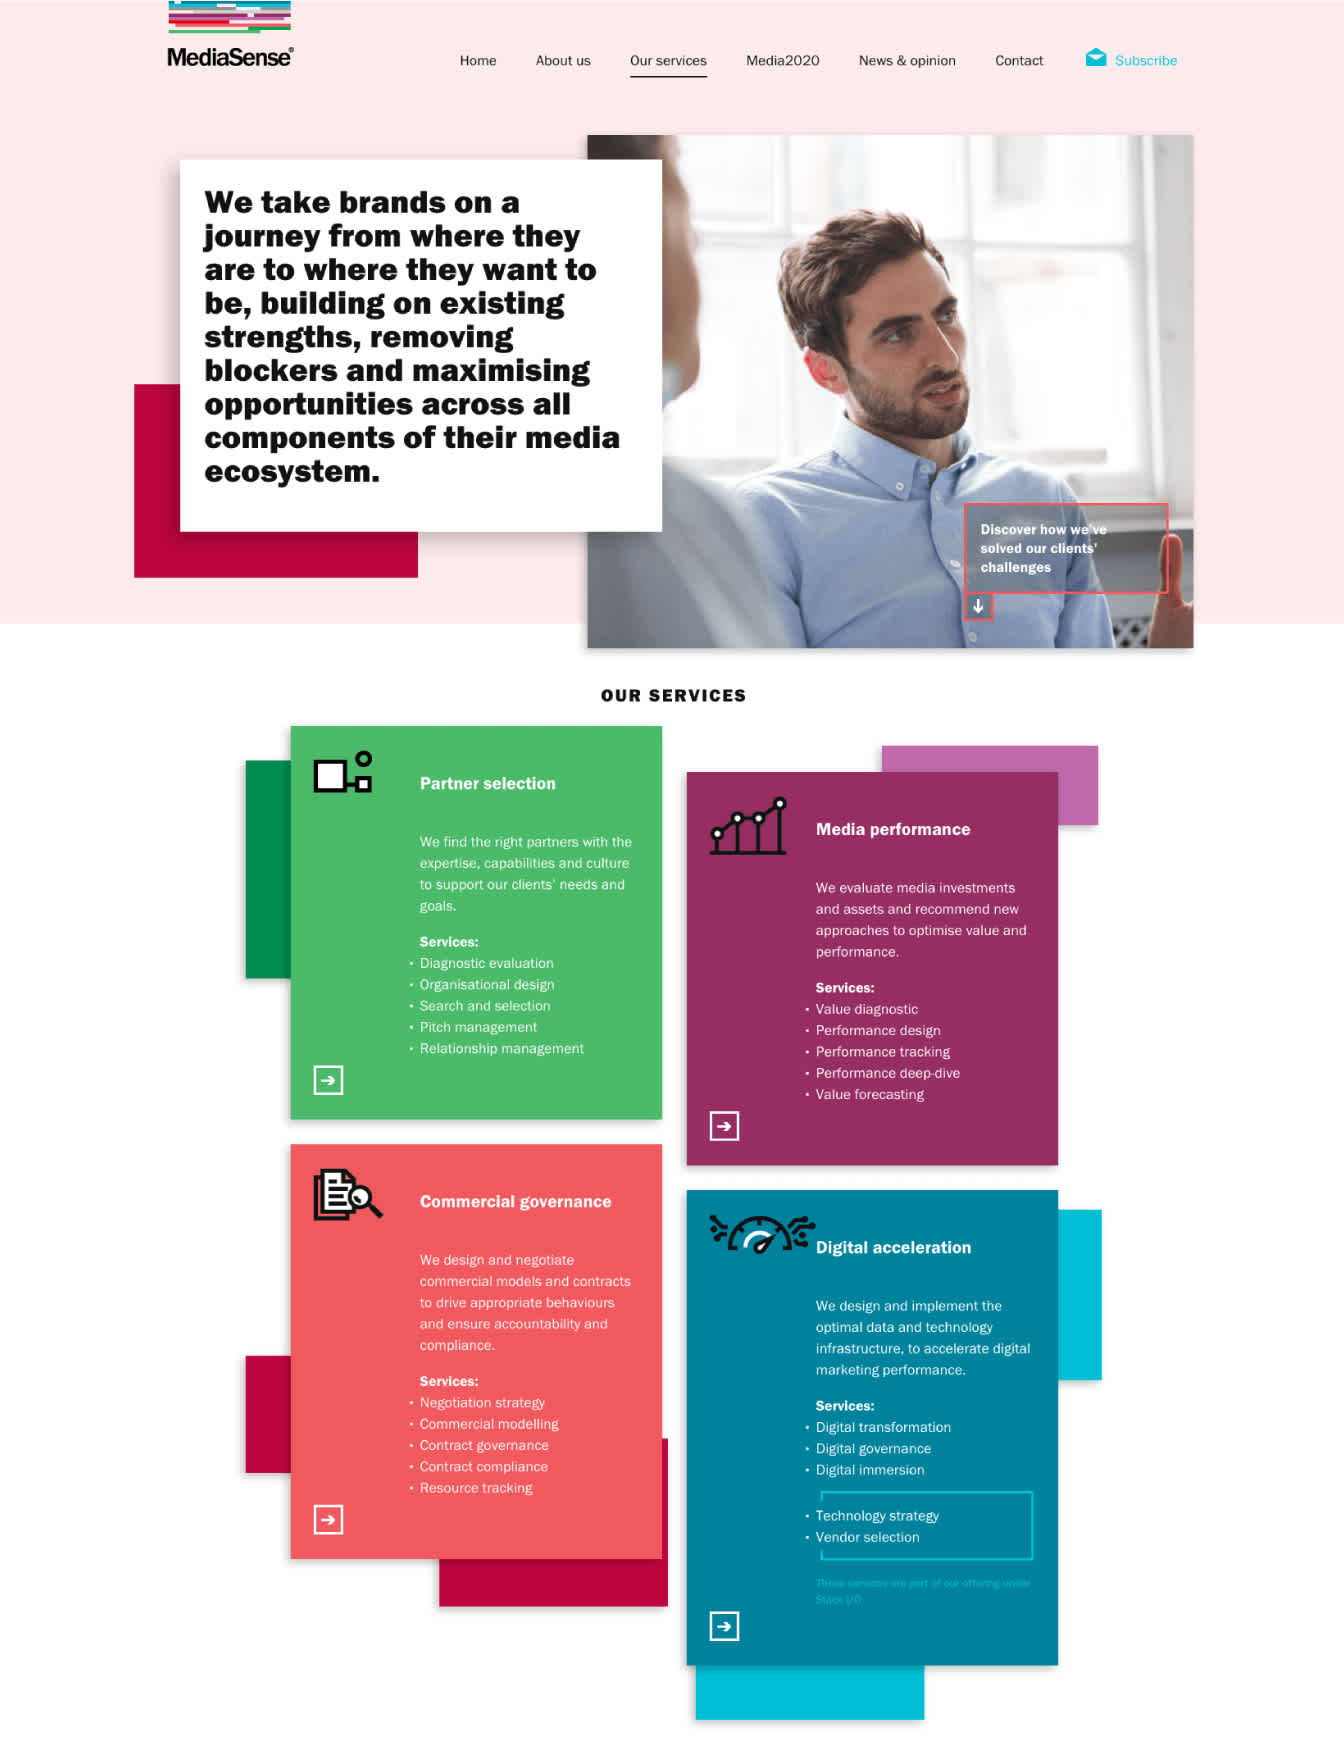 Image of the 'Our services' page from the MediaSense website design. The page depicts a header image of a man with some leading text next to it. Under that are 4 services split into 4 coloured squares with an icon representing each and bullet points summing them up.